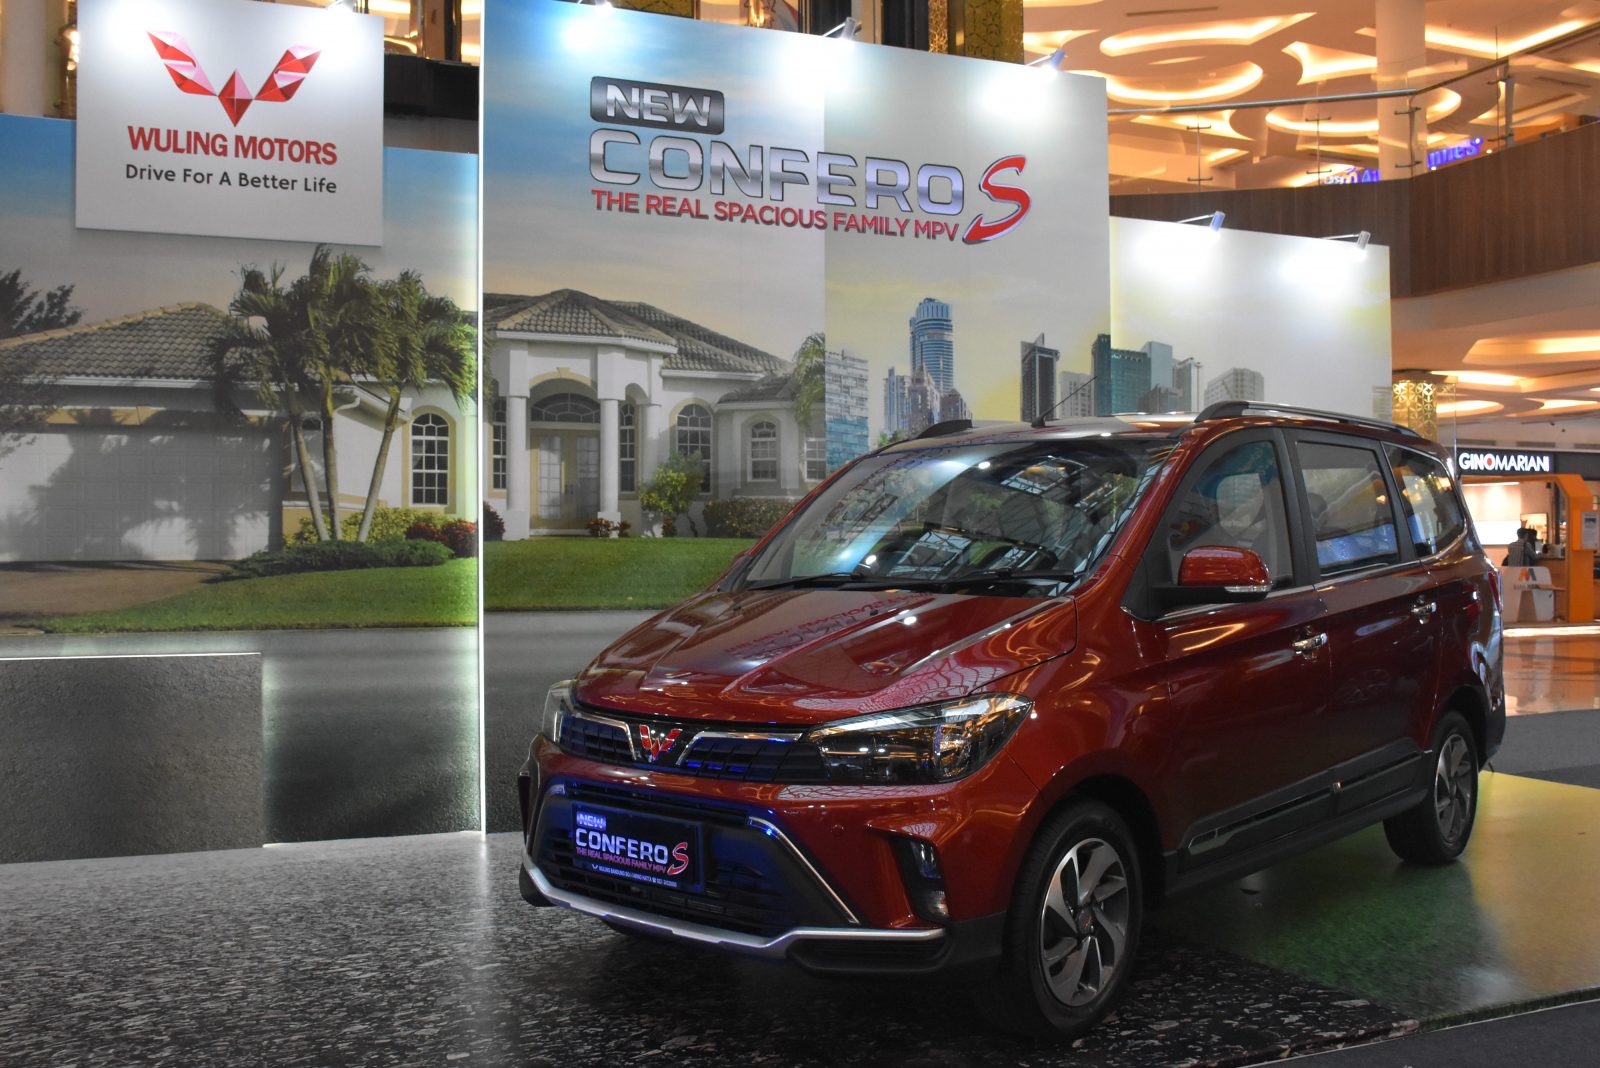 Image Wuling Officially Presents The New Confero S in Bandung